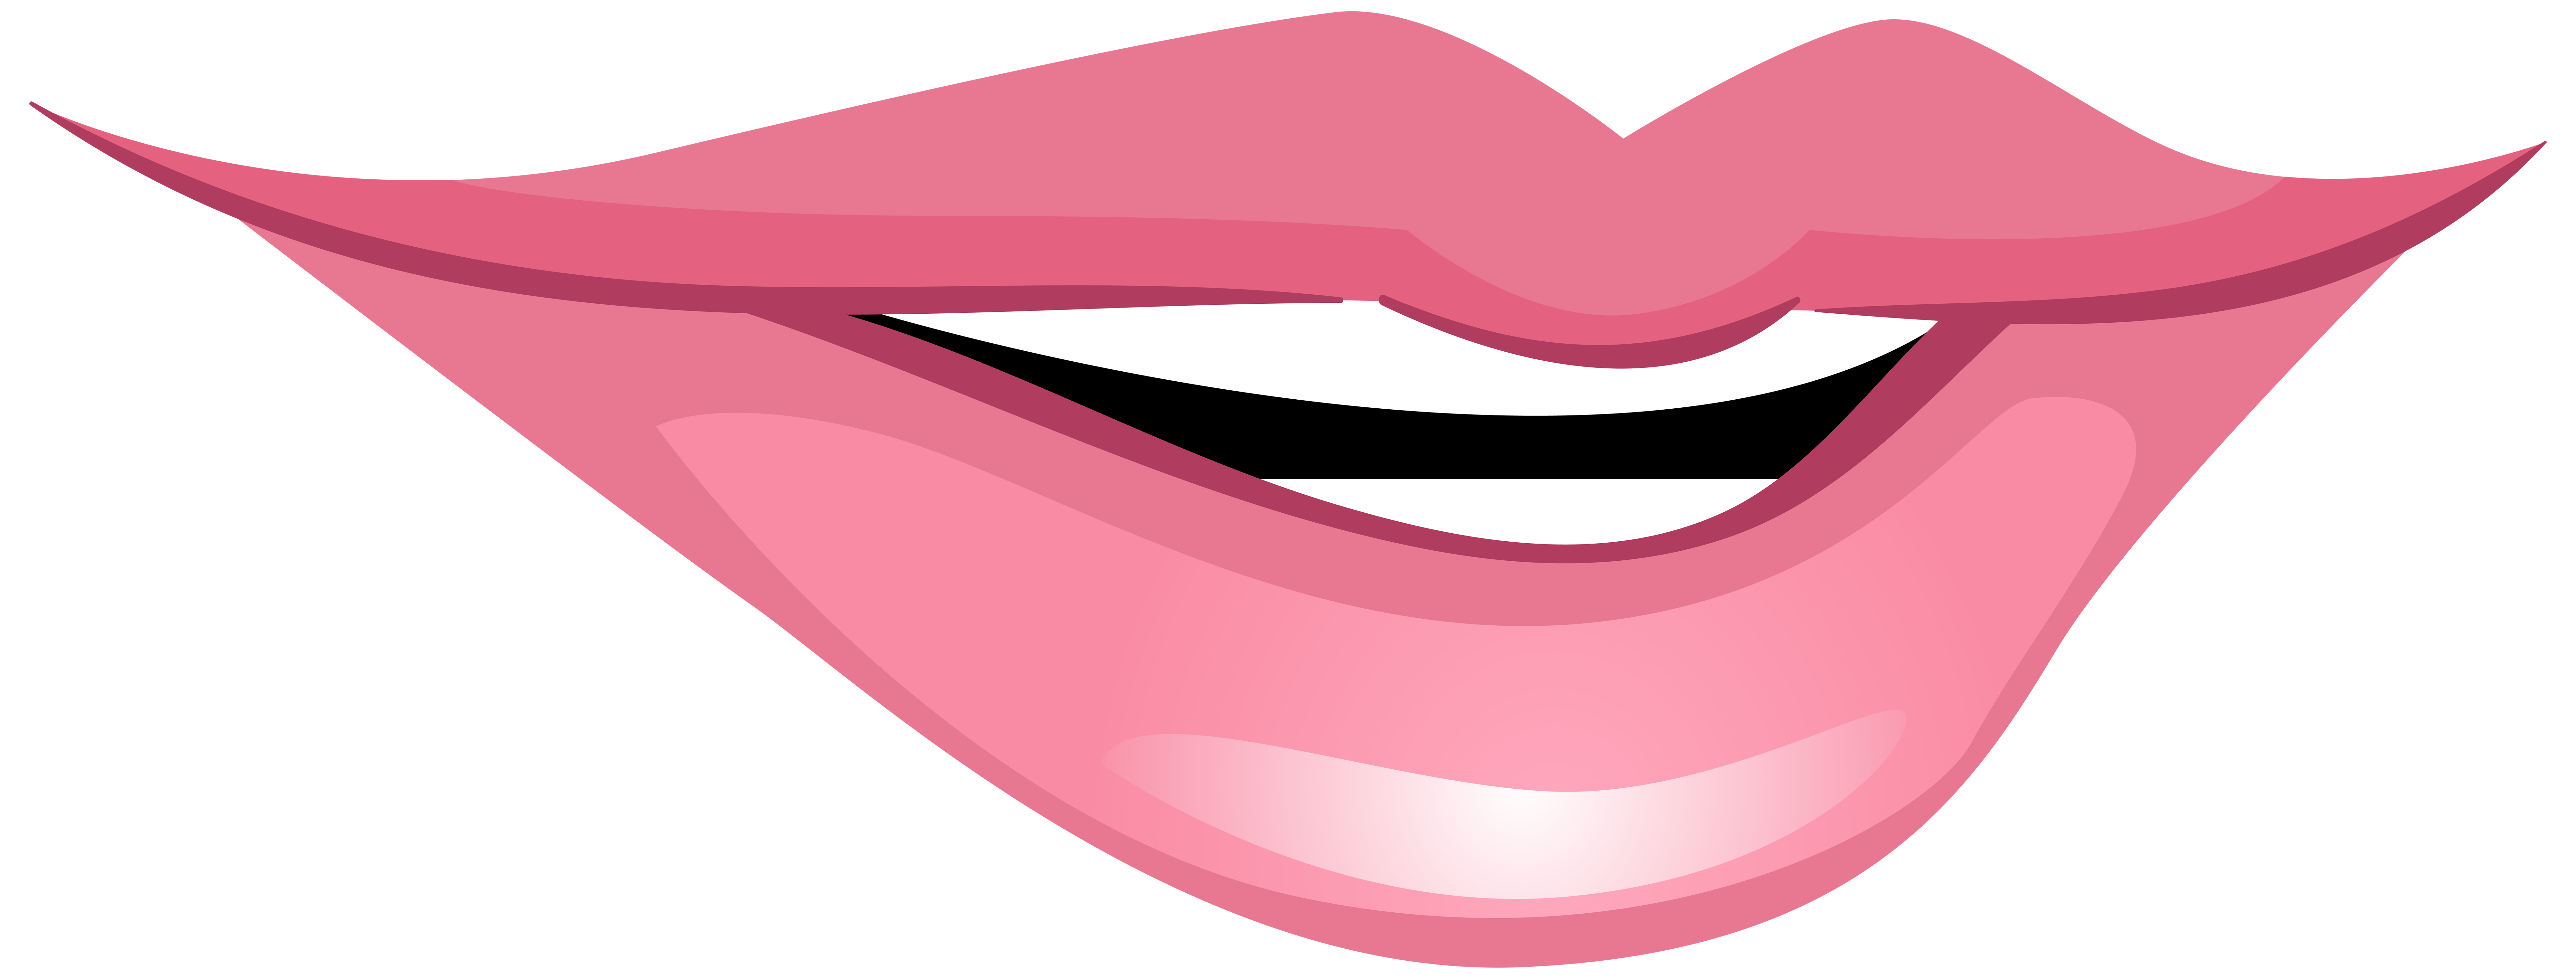 clipart smiling lips - photo #35